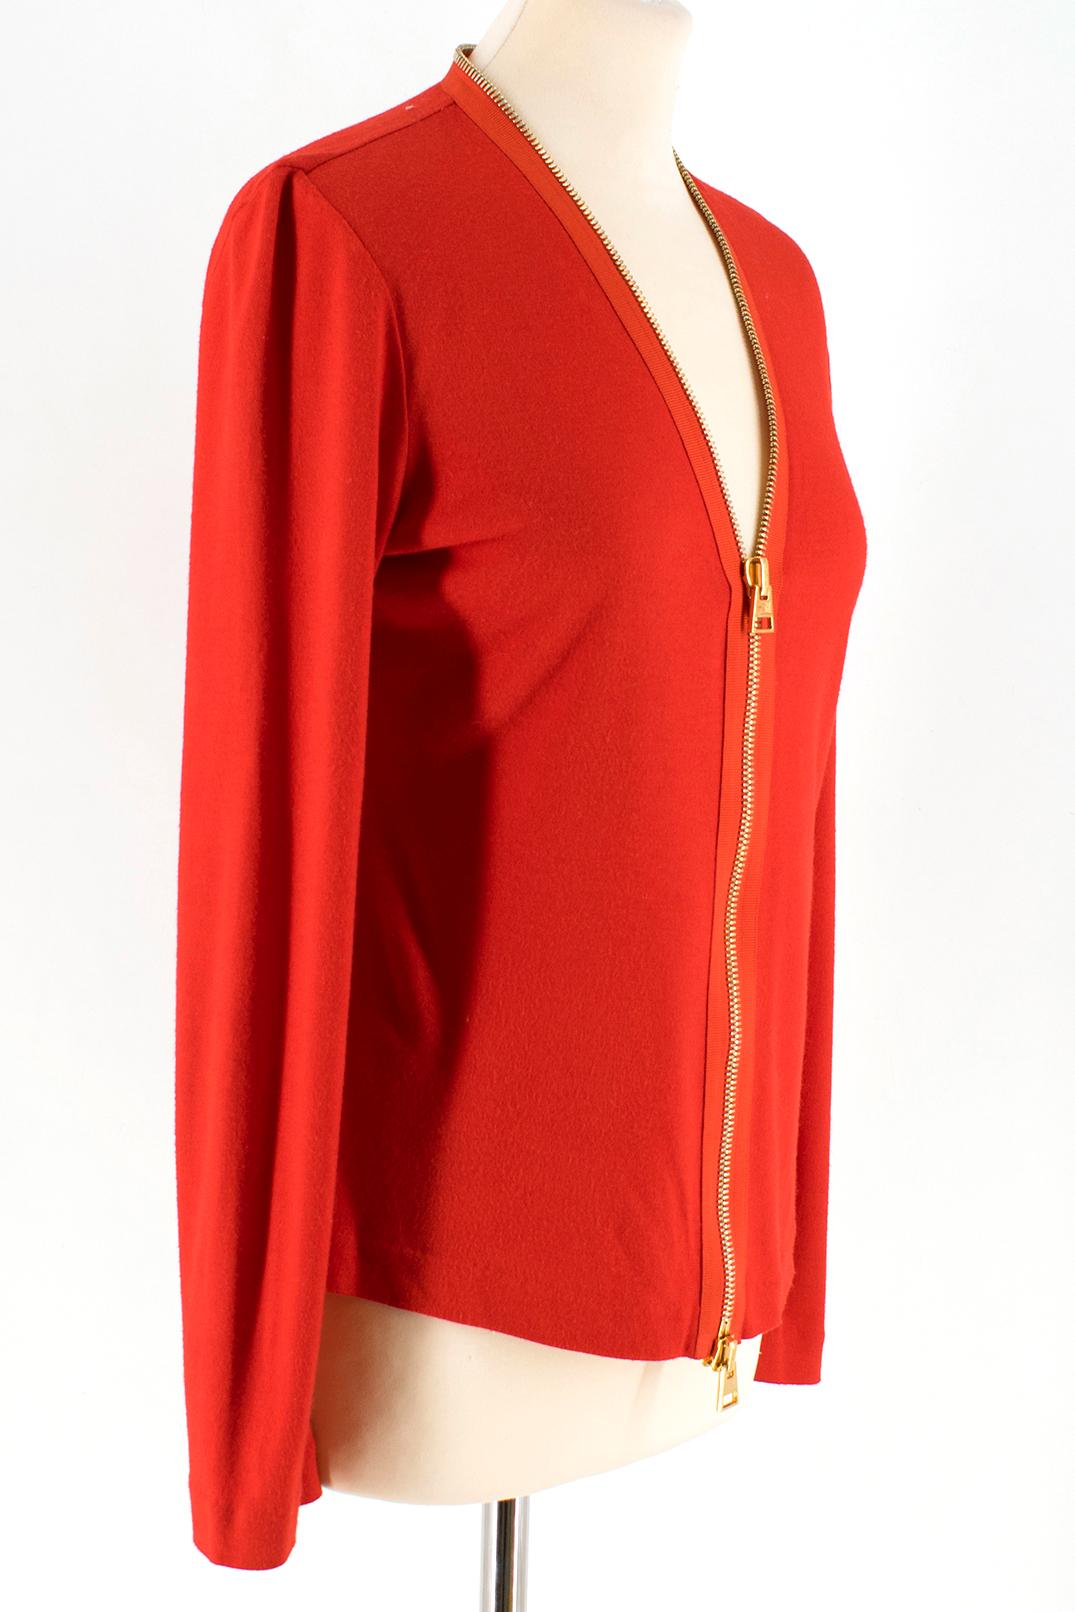 Tom Ford Red Zip Around Cardigan

- red long sleeve top
- golden ton zip fastening to the front 
- adjustable v neckline 

Please note, these items are pre-owned and may show some signs of storage, even when unworn and unused. This is reflected